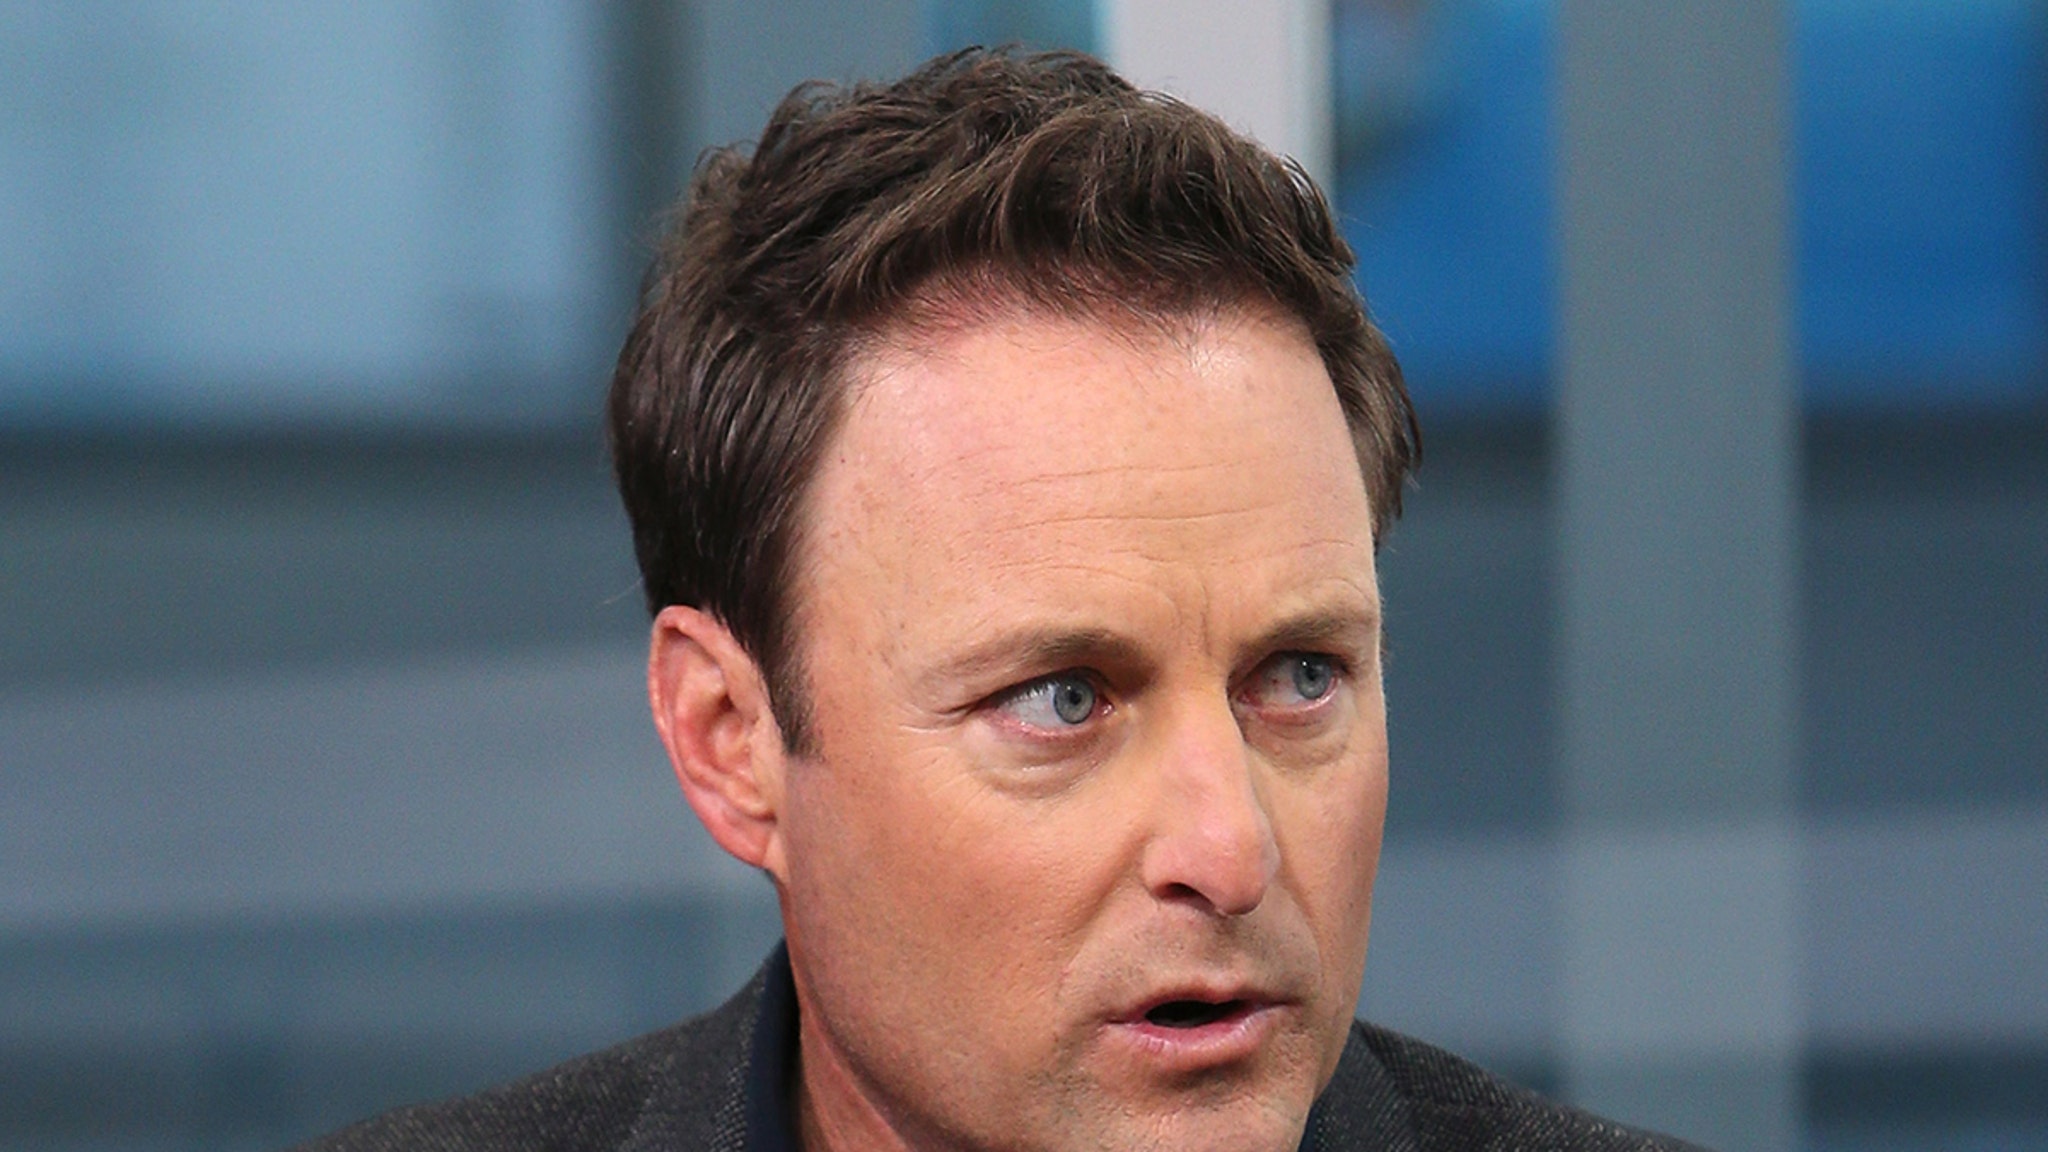 Chris Harrison hires powerful lawyer in ‘bachelor’s’ dispute